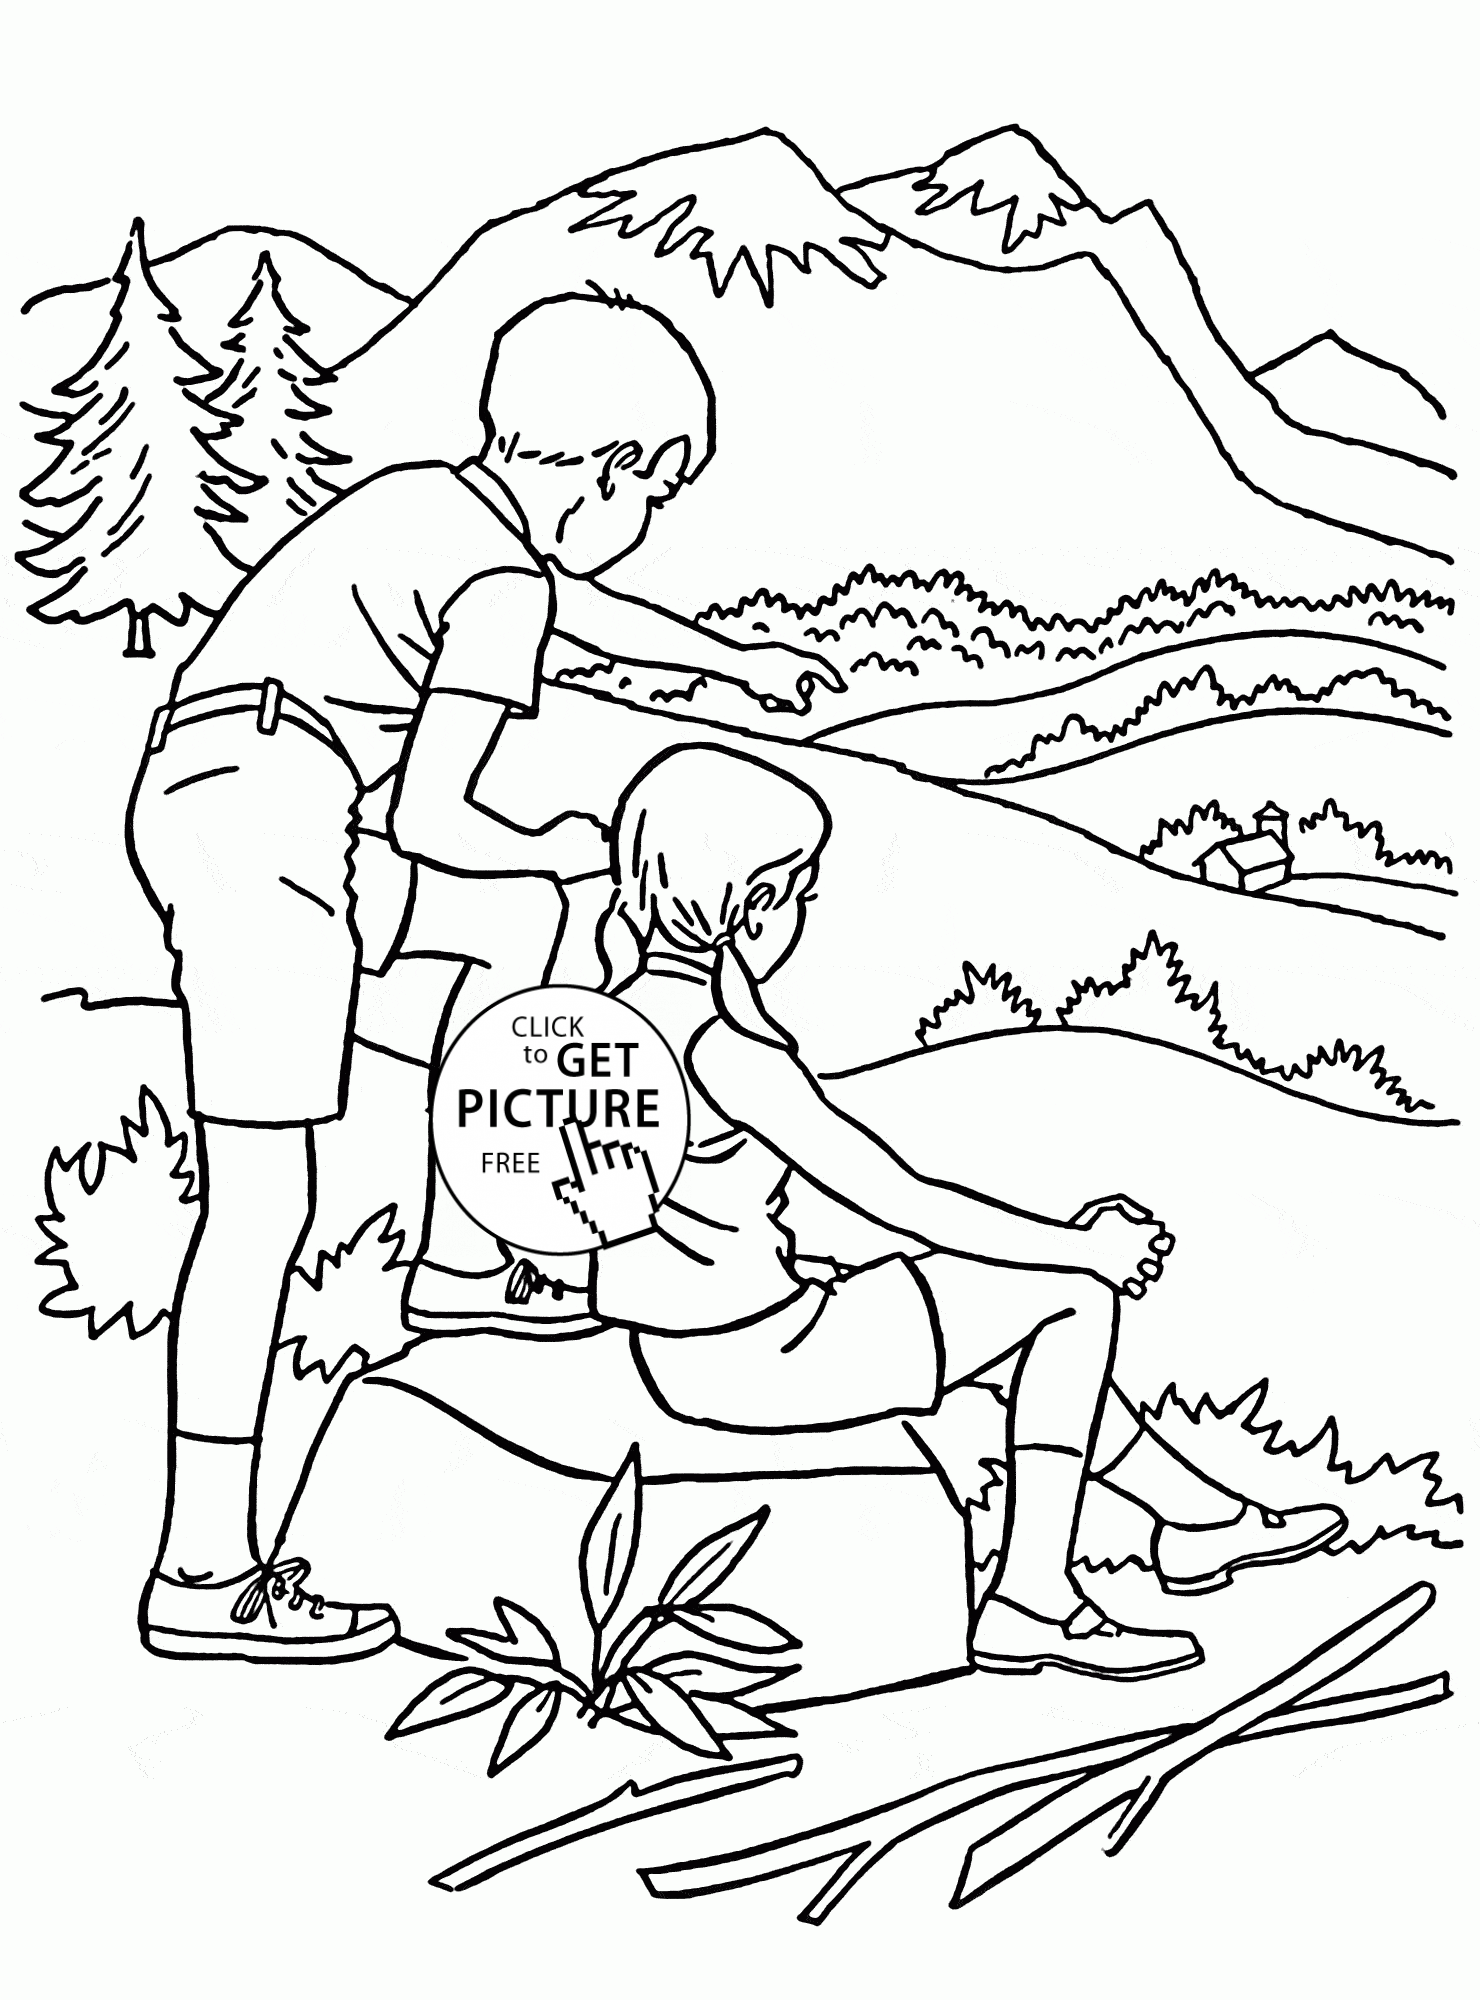 Forest in Summer coloring page for kids, seasons coloring pages